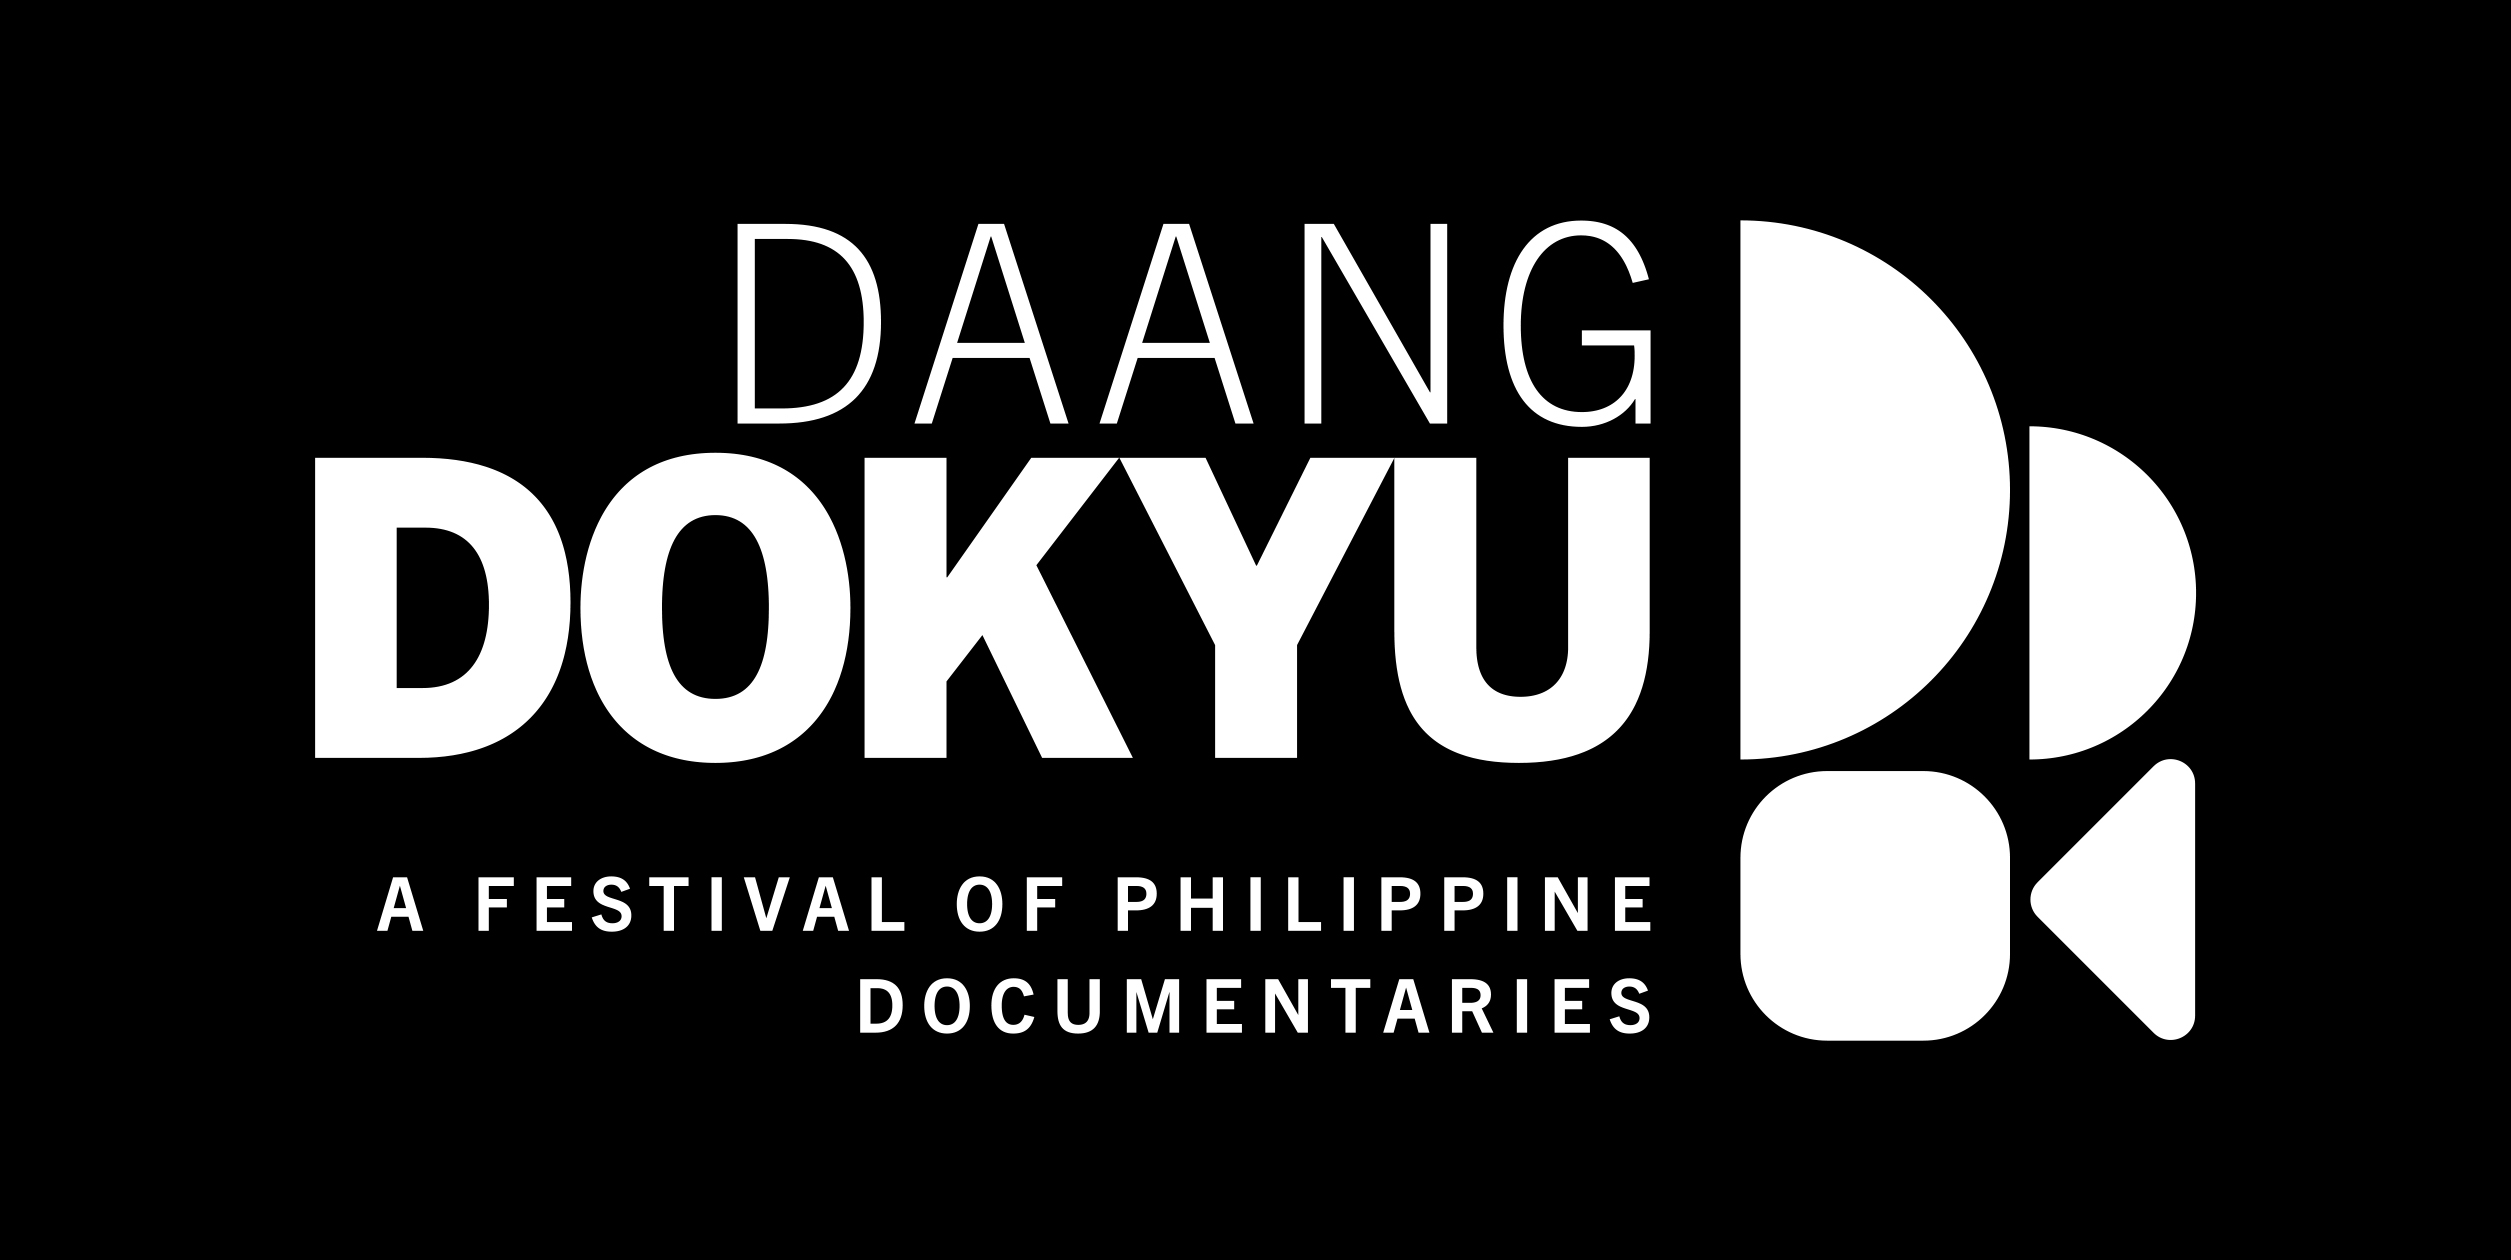 Daang Dokyu: A Celebration of Filipino Stories opens this March 16 to 21